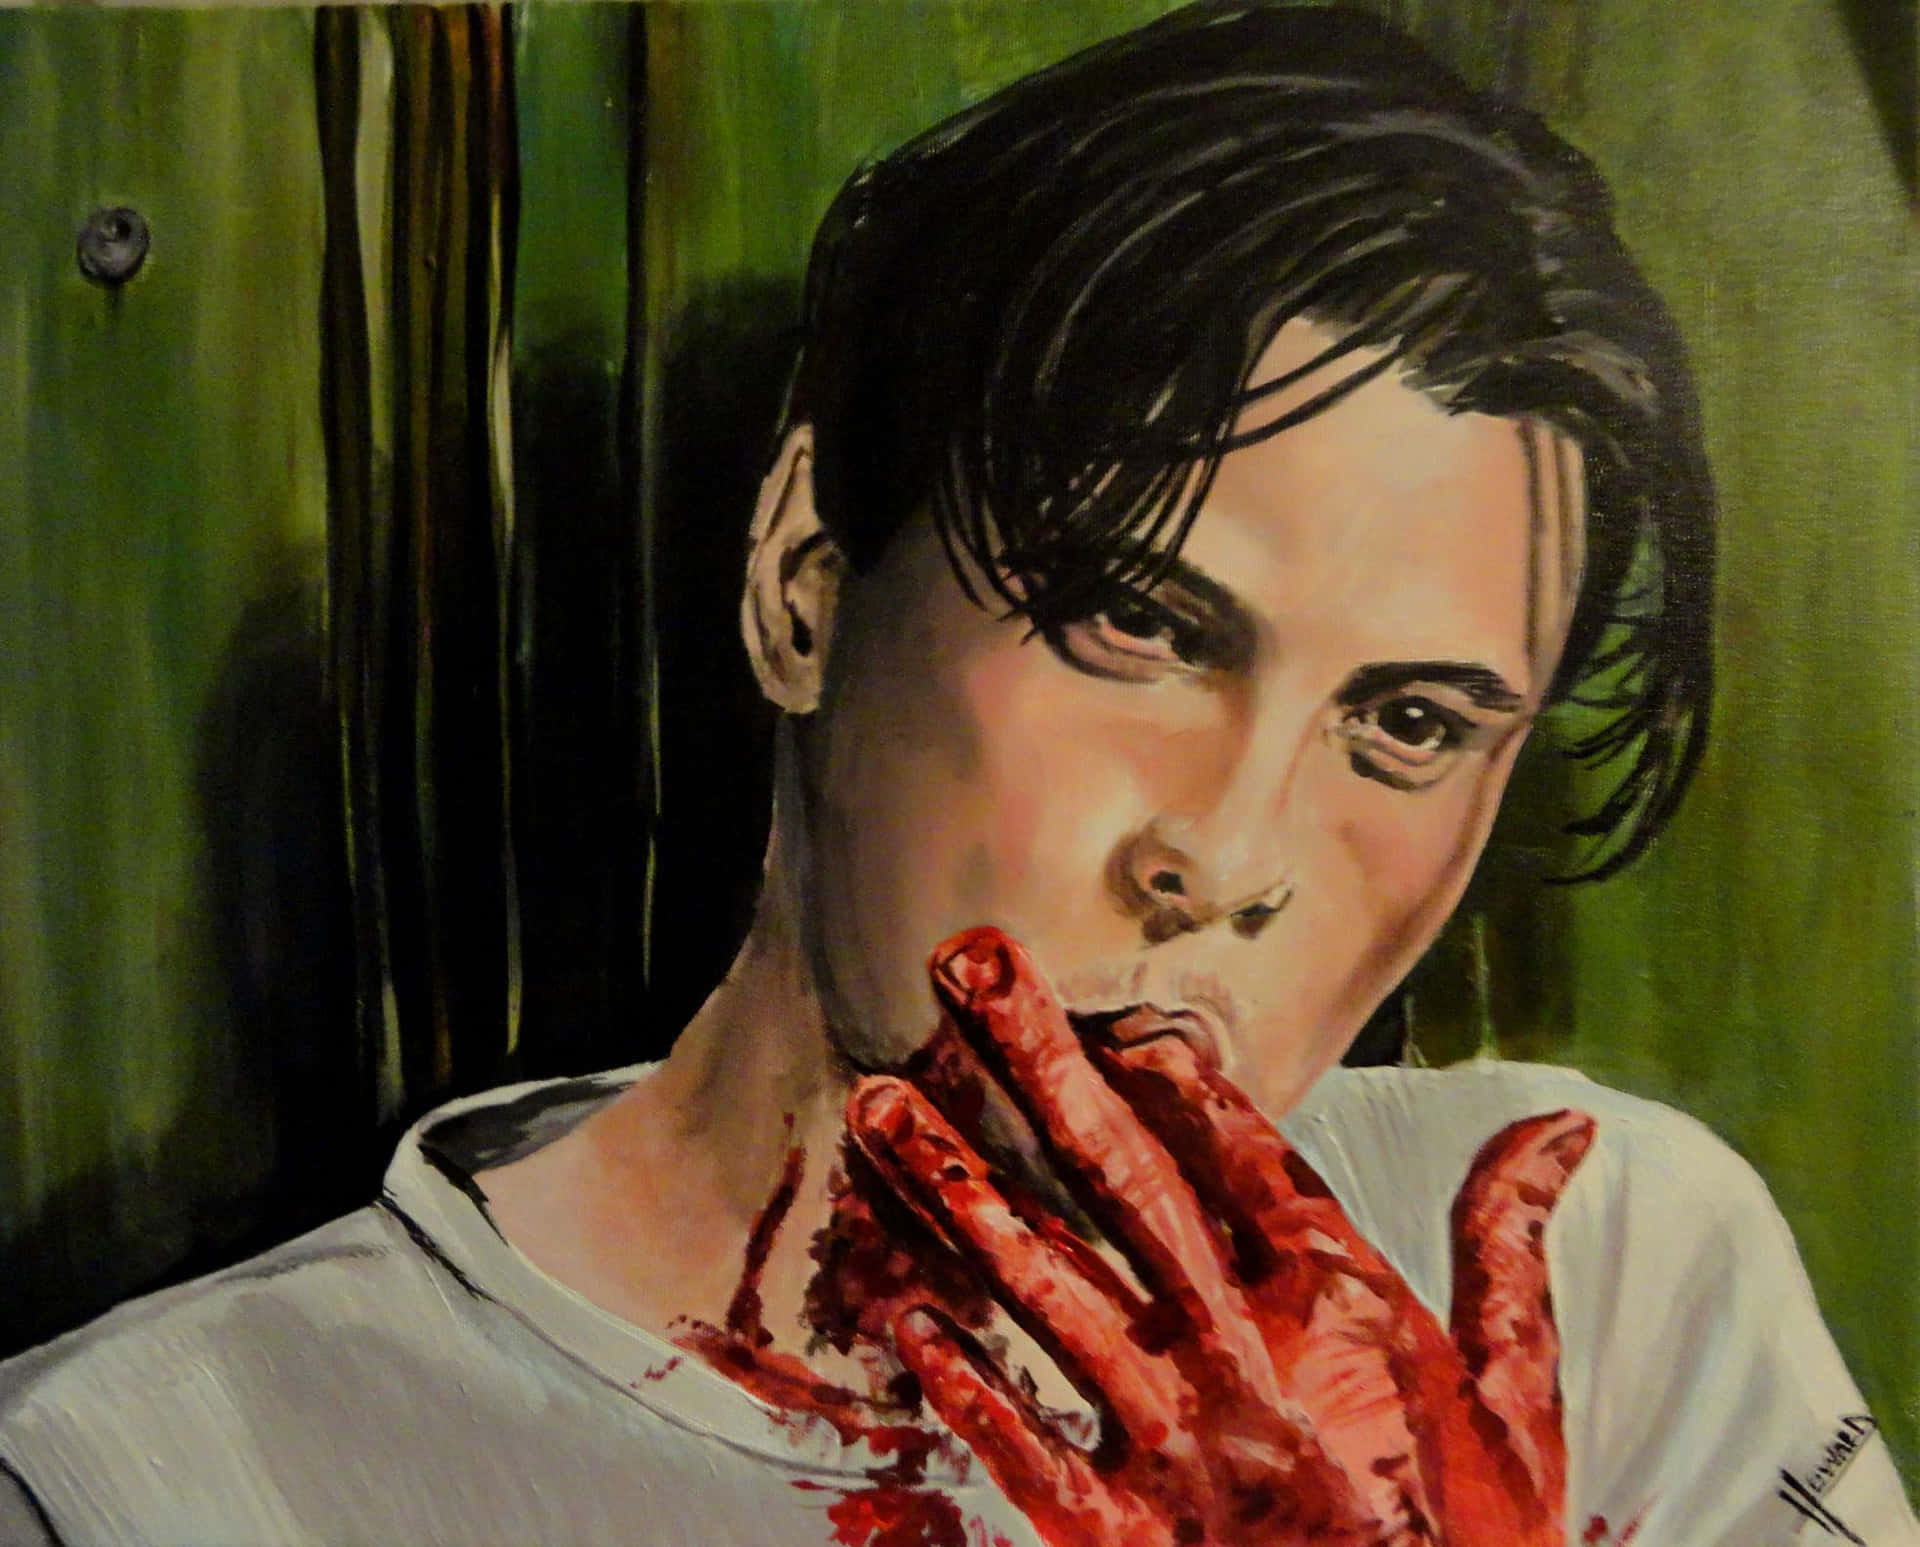 A Painting Of A Man With Blood On His Hands